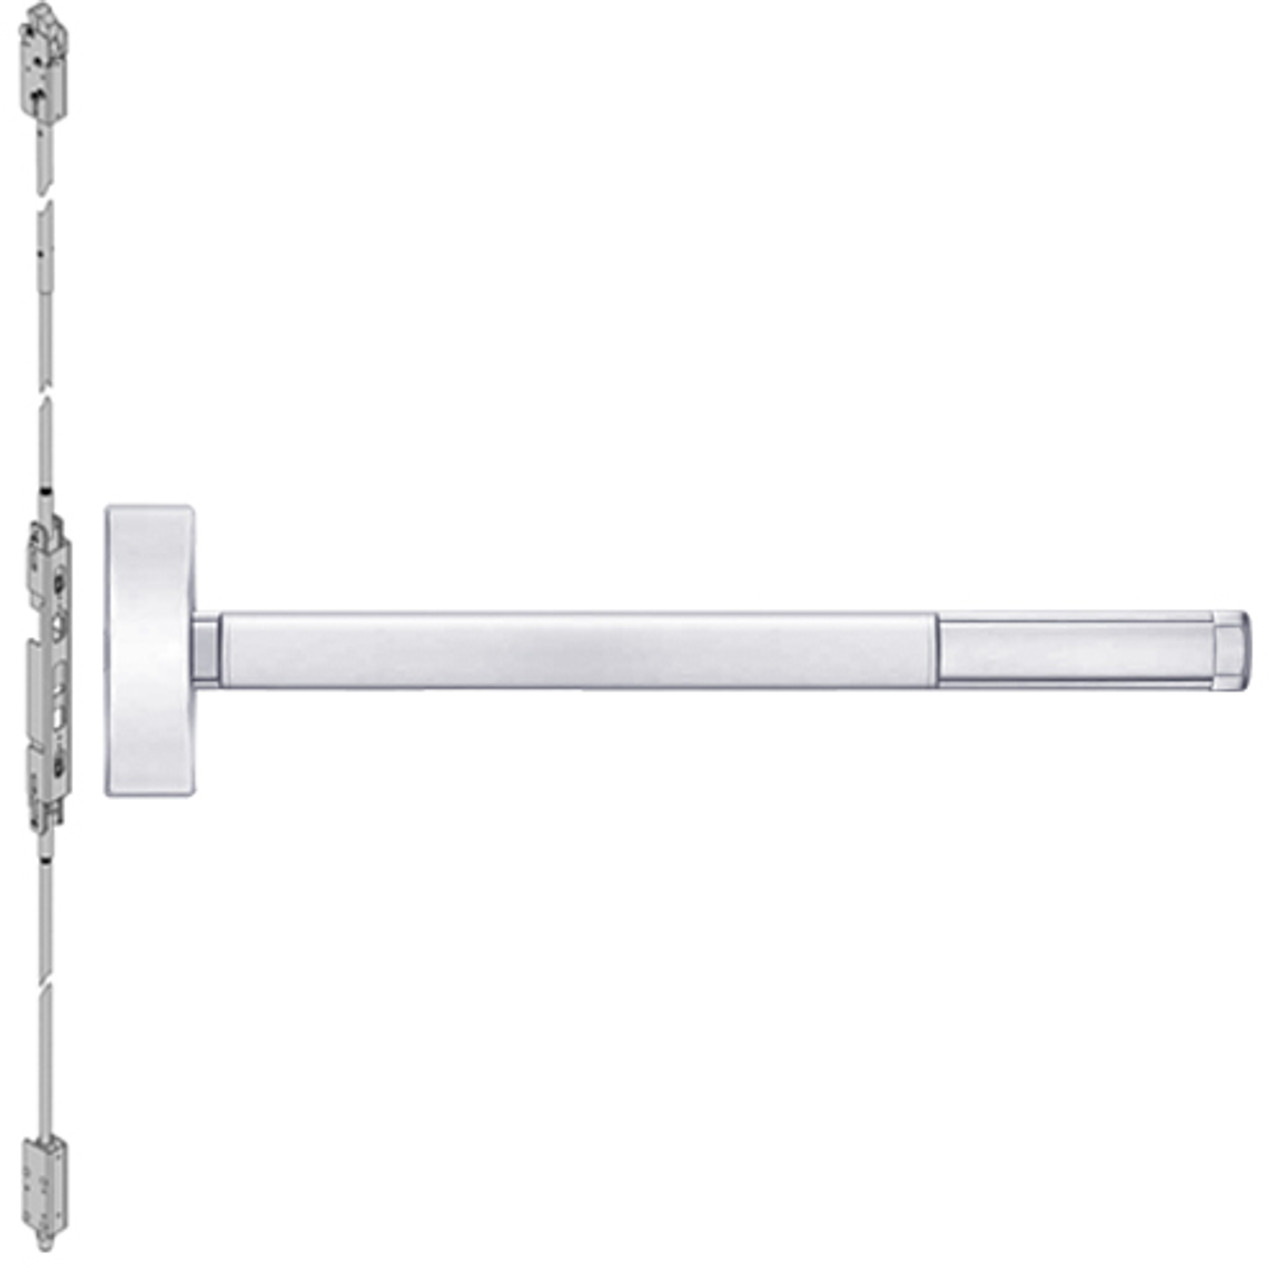 ELR2815LBR-625-36 PHI 2800 Series Concealed Vertical Rod Exit Device with Electric Latch Retraction Prepped for Thumbpiece Always Active in Bright Chrome Finish